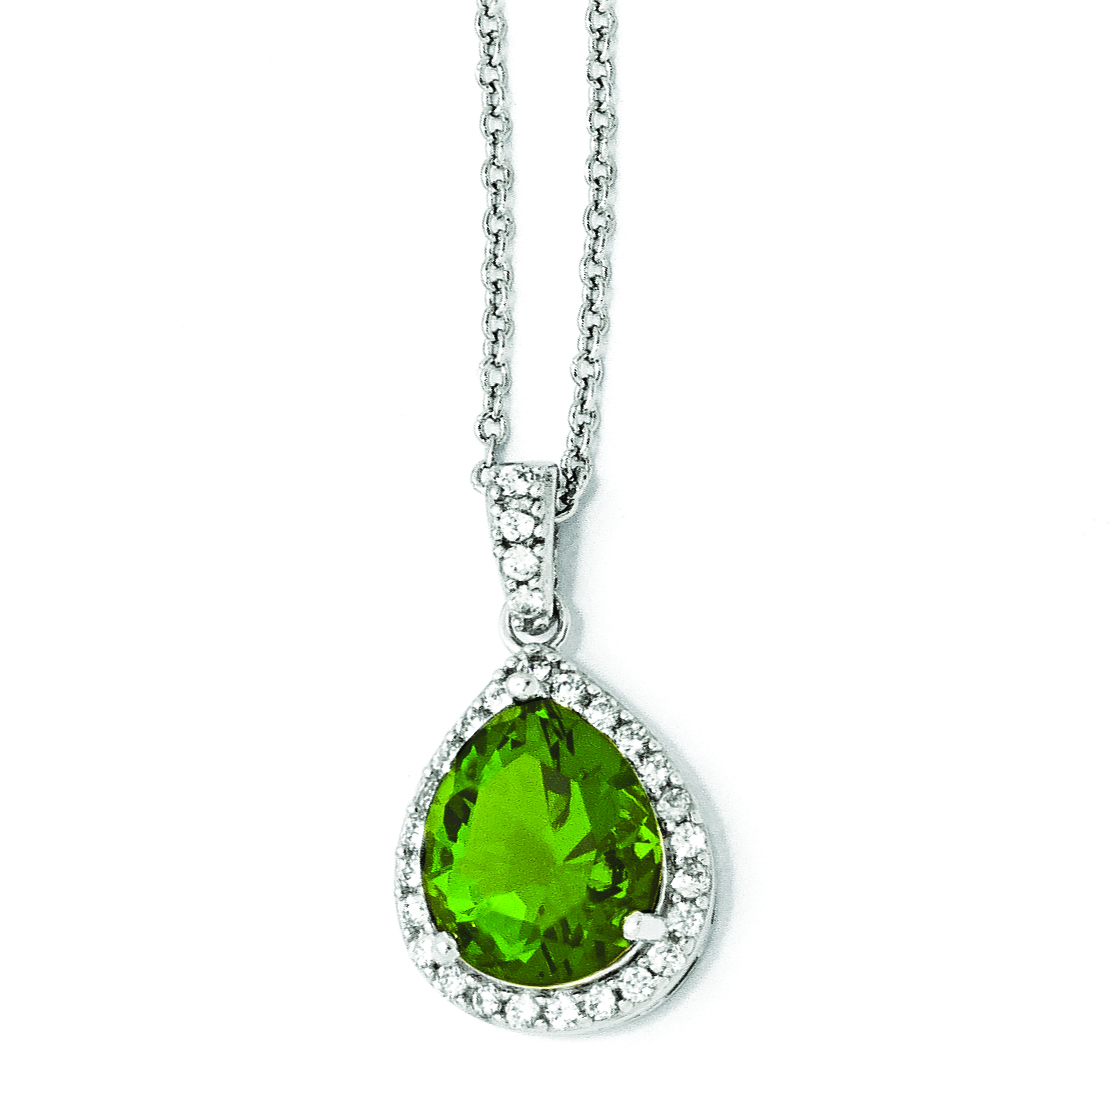 Cheryl M Sterling Silver Glass Simulated Emerald & CZ Pendant Necklace